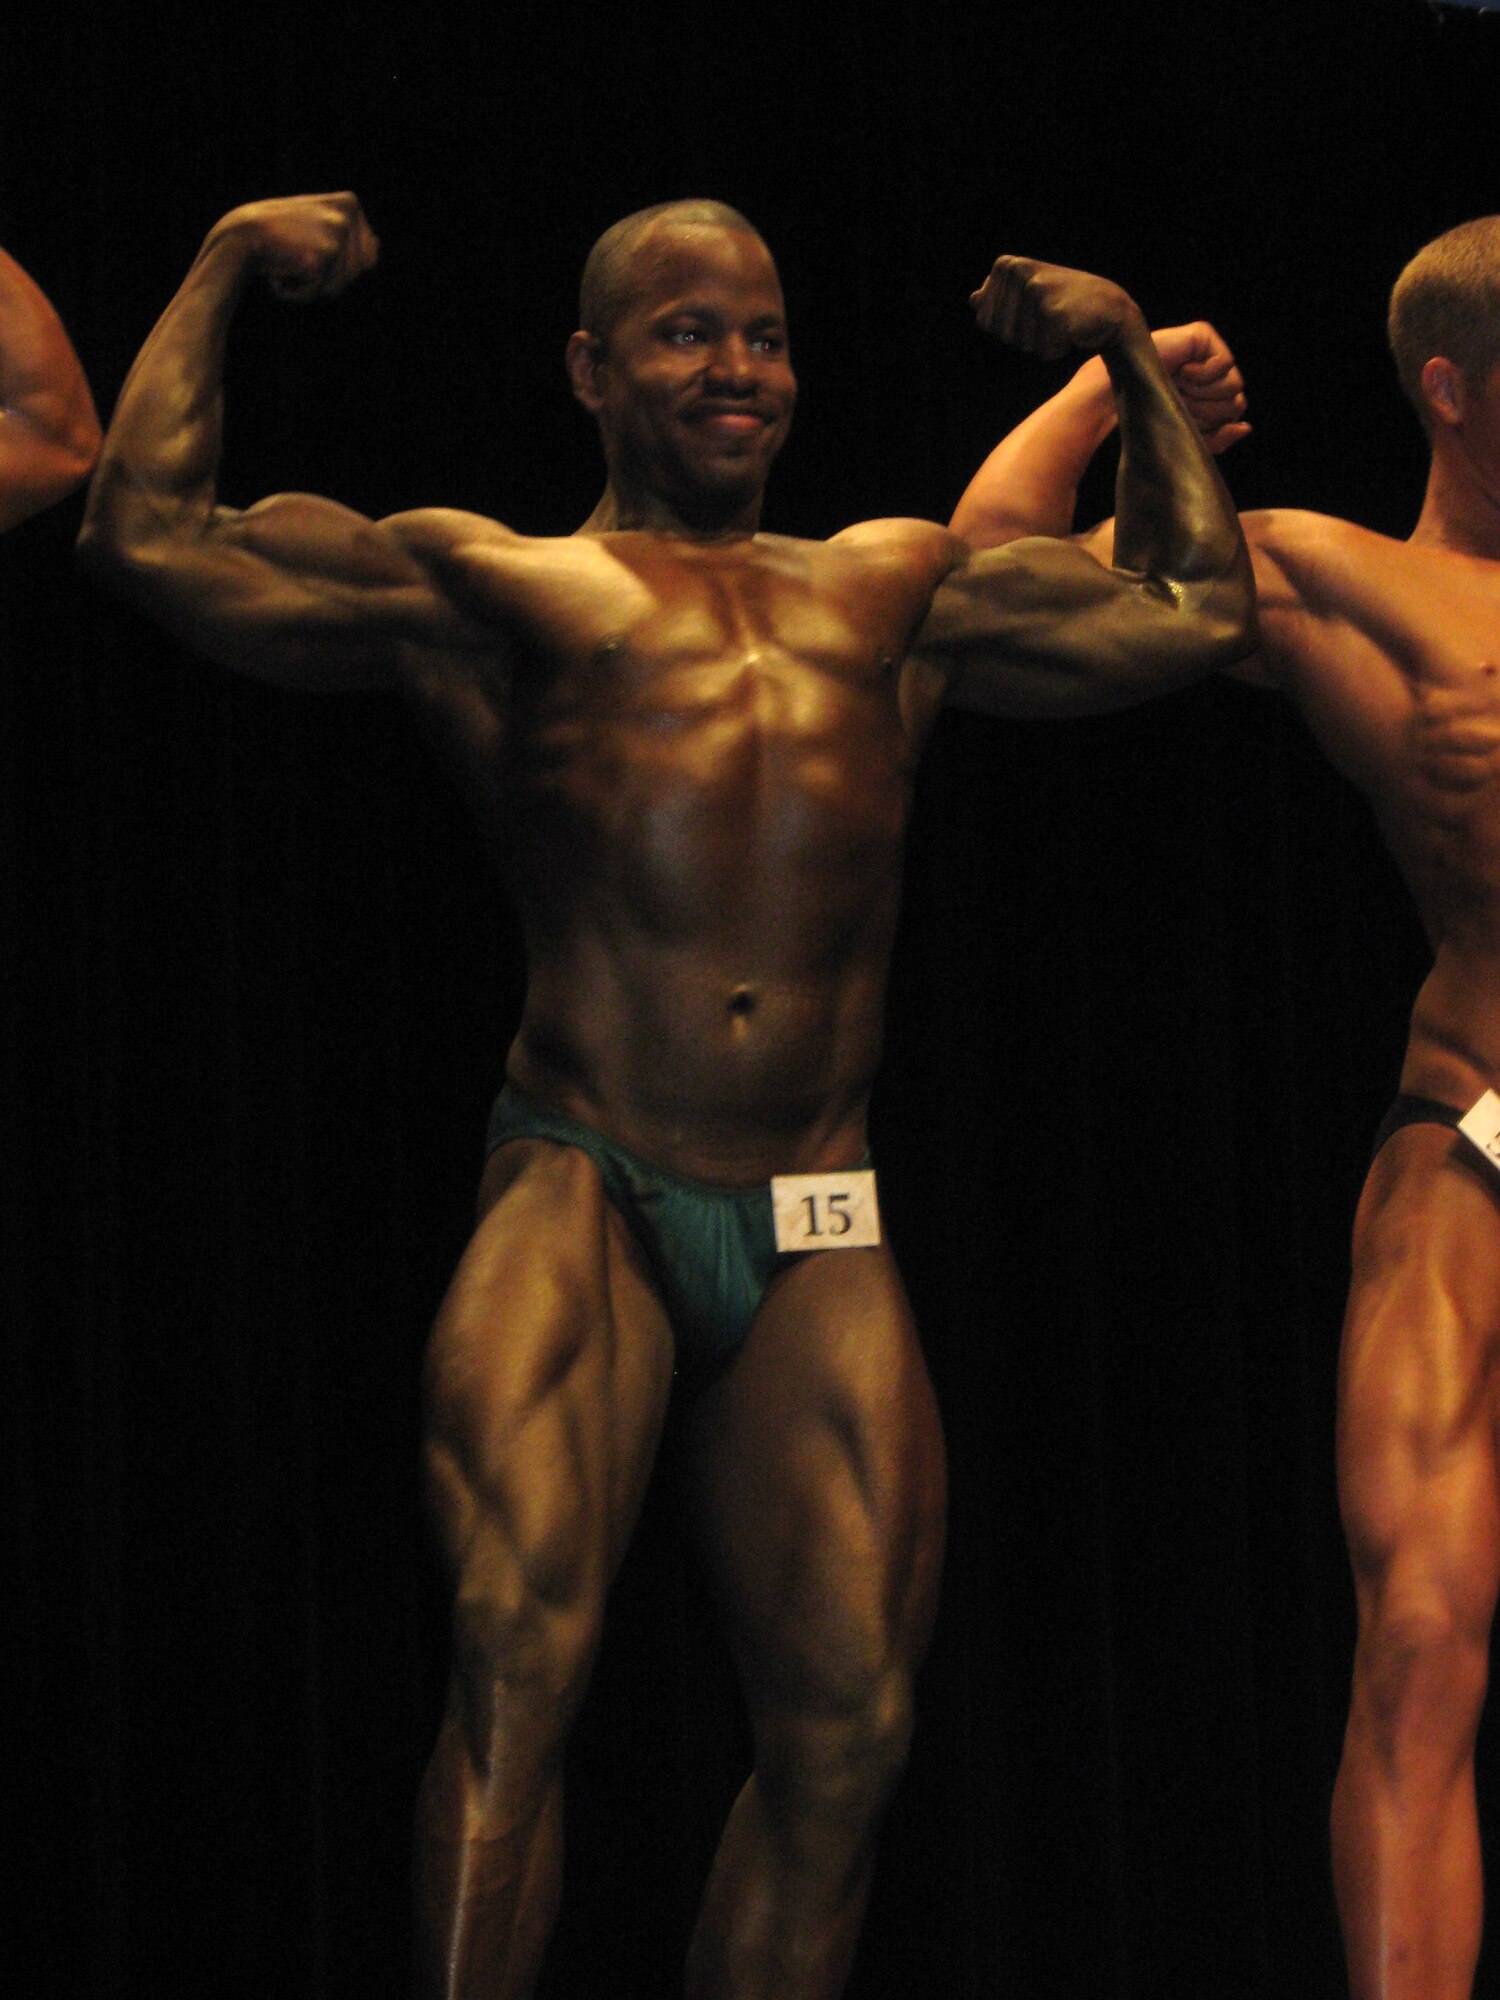 LIBERTY, Mo. - Capt. Michael Boswell, 509th Logistics Readiness Squadron, poses on stage April 20 at the 2008 Natural Southern States Classic body building competition. Captain Boswell came in 4th place in his division at the 2008 Natural Southern States Classic. (Photo printed with permission of Captain Boswell)